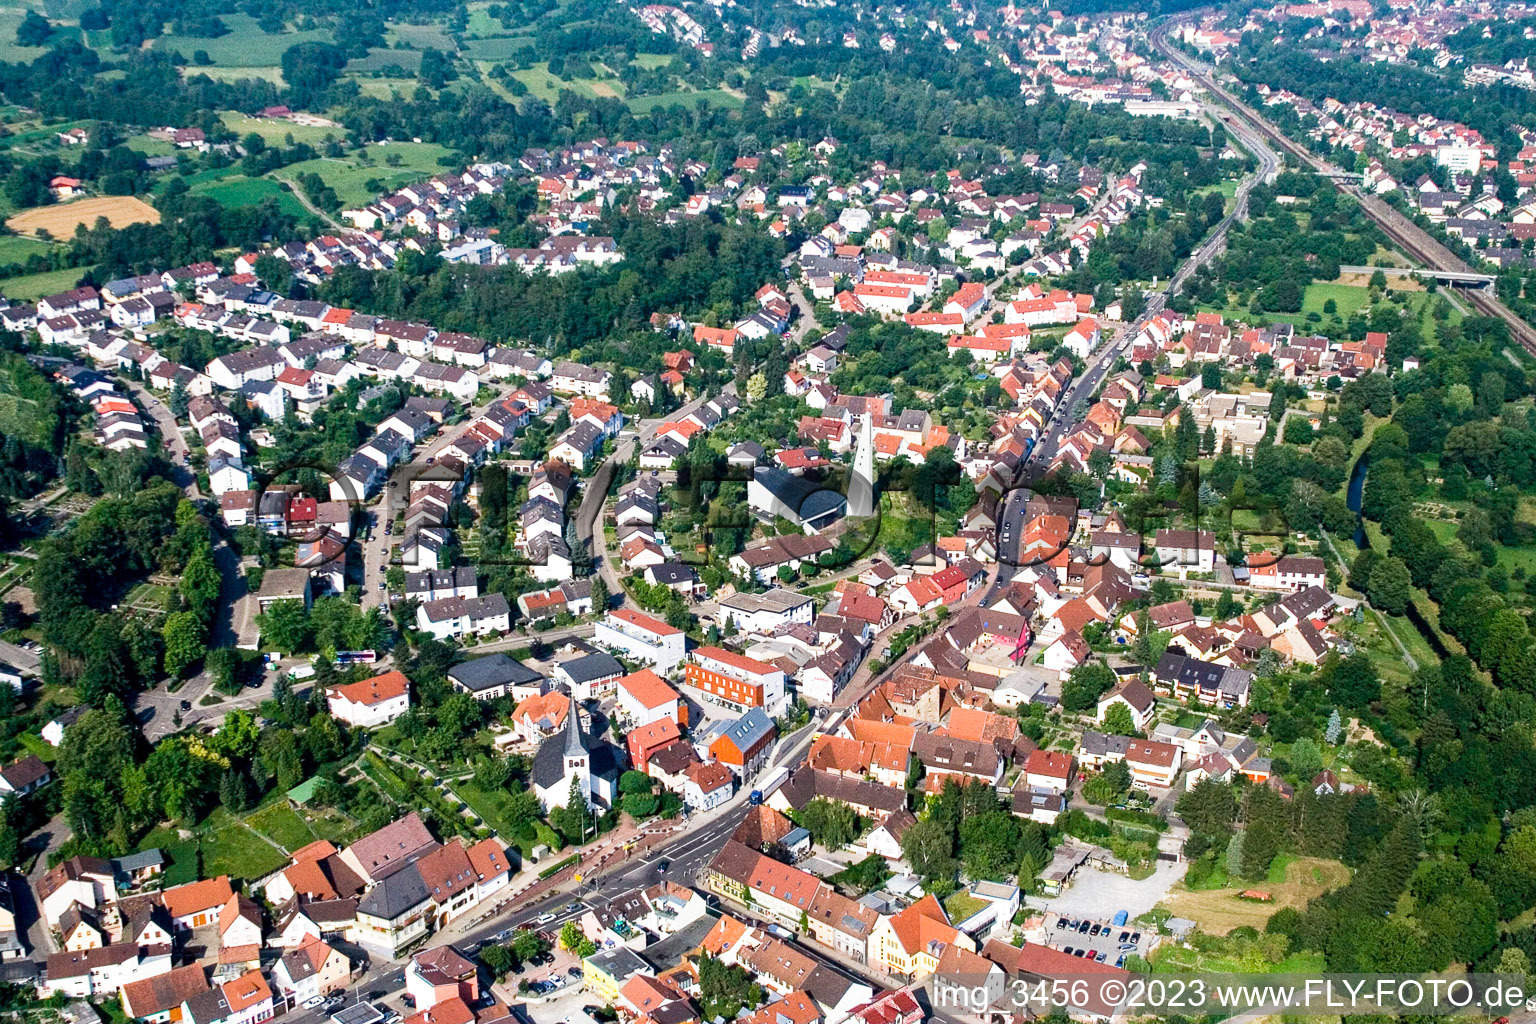 Aerial view of Berghause in the district Berghausen in Pfinztal in the state Baden-Wuerttemberg, Germany